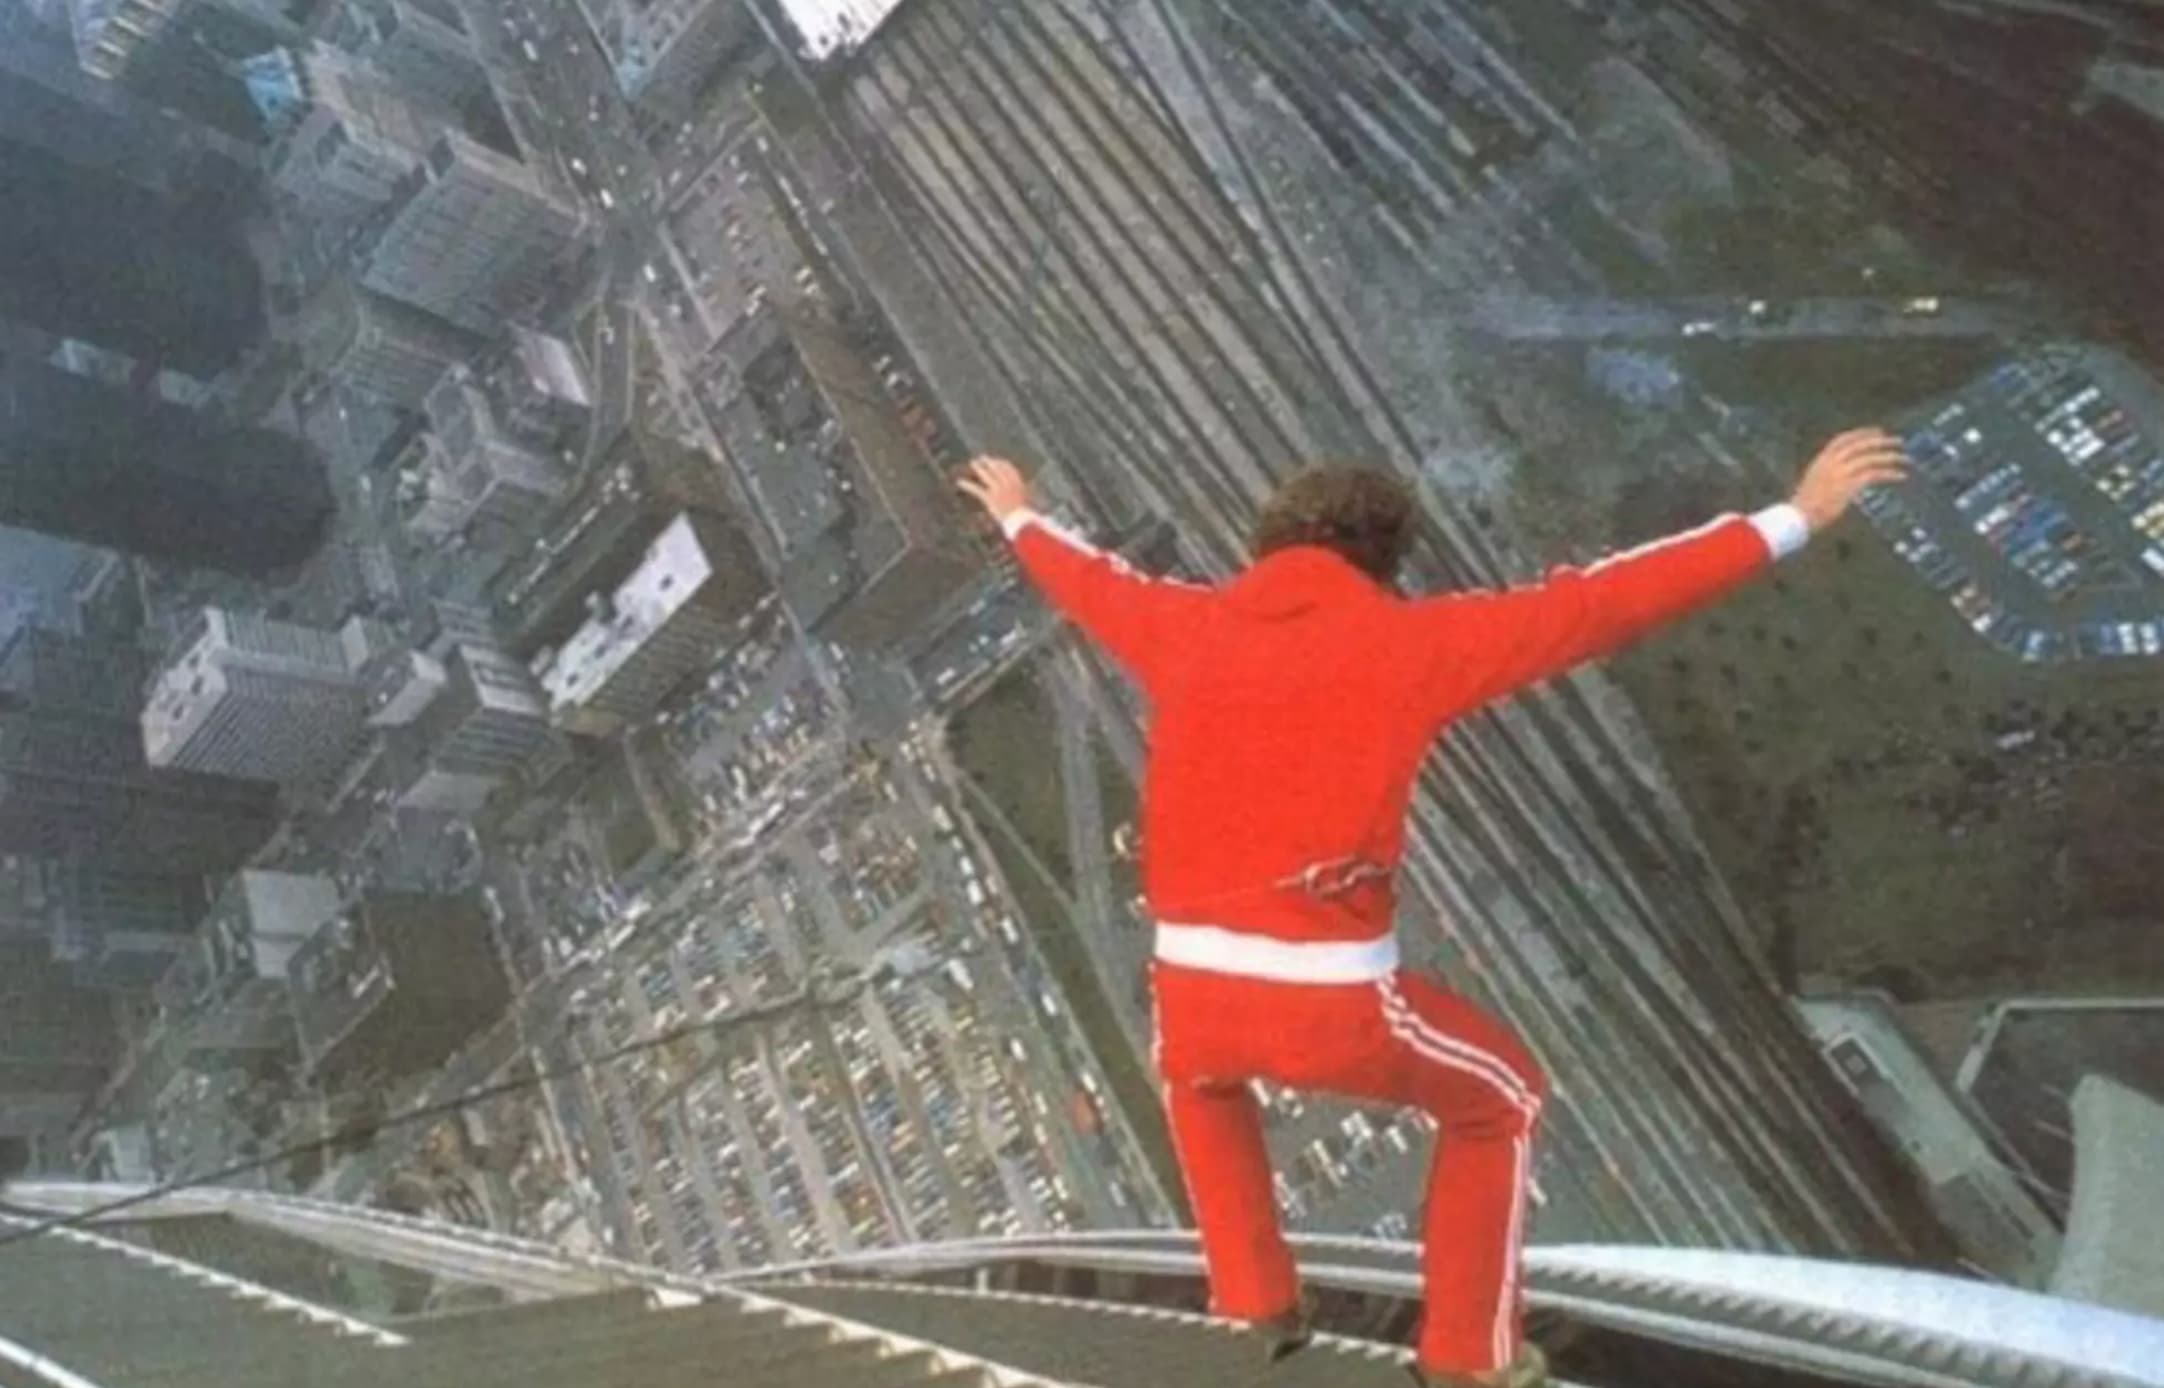 “There's a stunt in a mostly forgotten Canadian action movie called ‘Highpoint’ where the stuntman jumped off the CN Tower (at the time the world's tallest building) with only a hidden parachute as protection.”